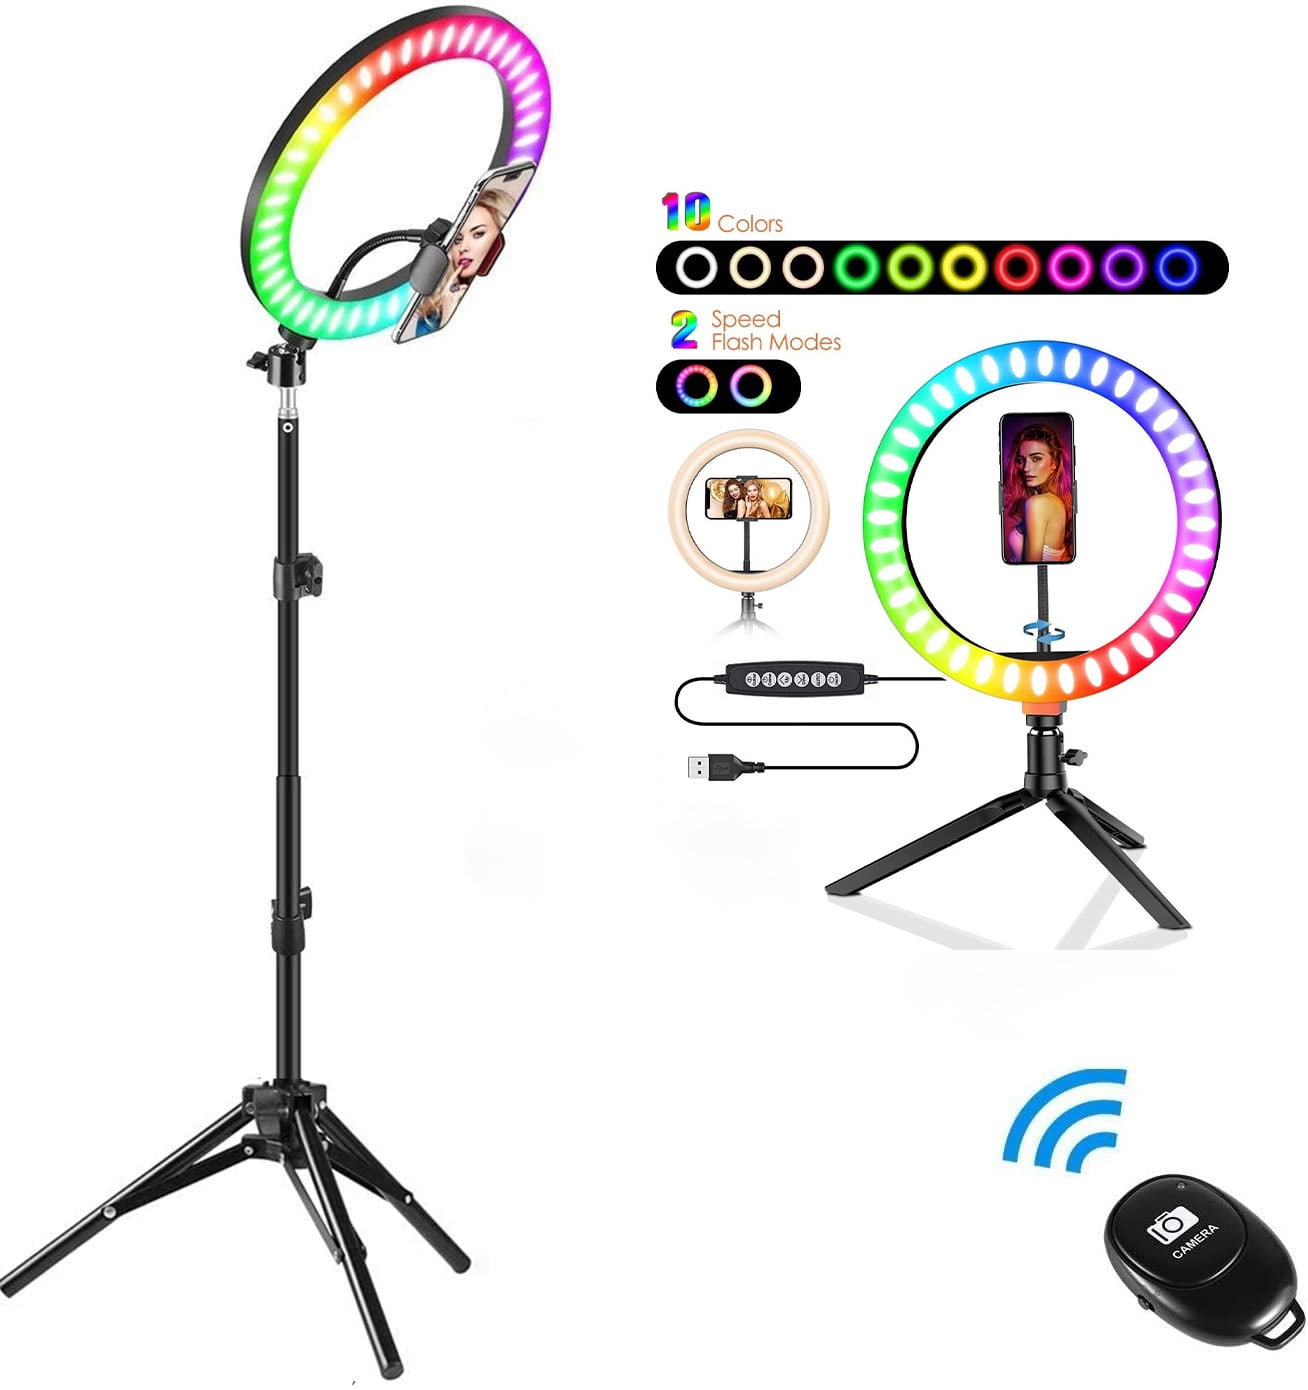 Photography GOXMGO Dimmable LED Light Ring with 26 RGB Color Modes and 10 Brightness YouTube Makeup Tiktok 10 Selfie Ring Light with Tripod Stand USB Powered Phone Holder for Live Streaming 